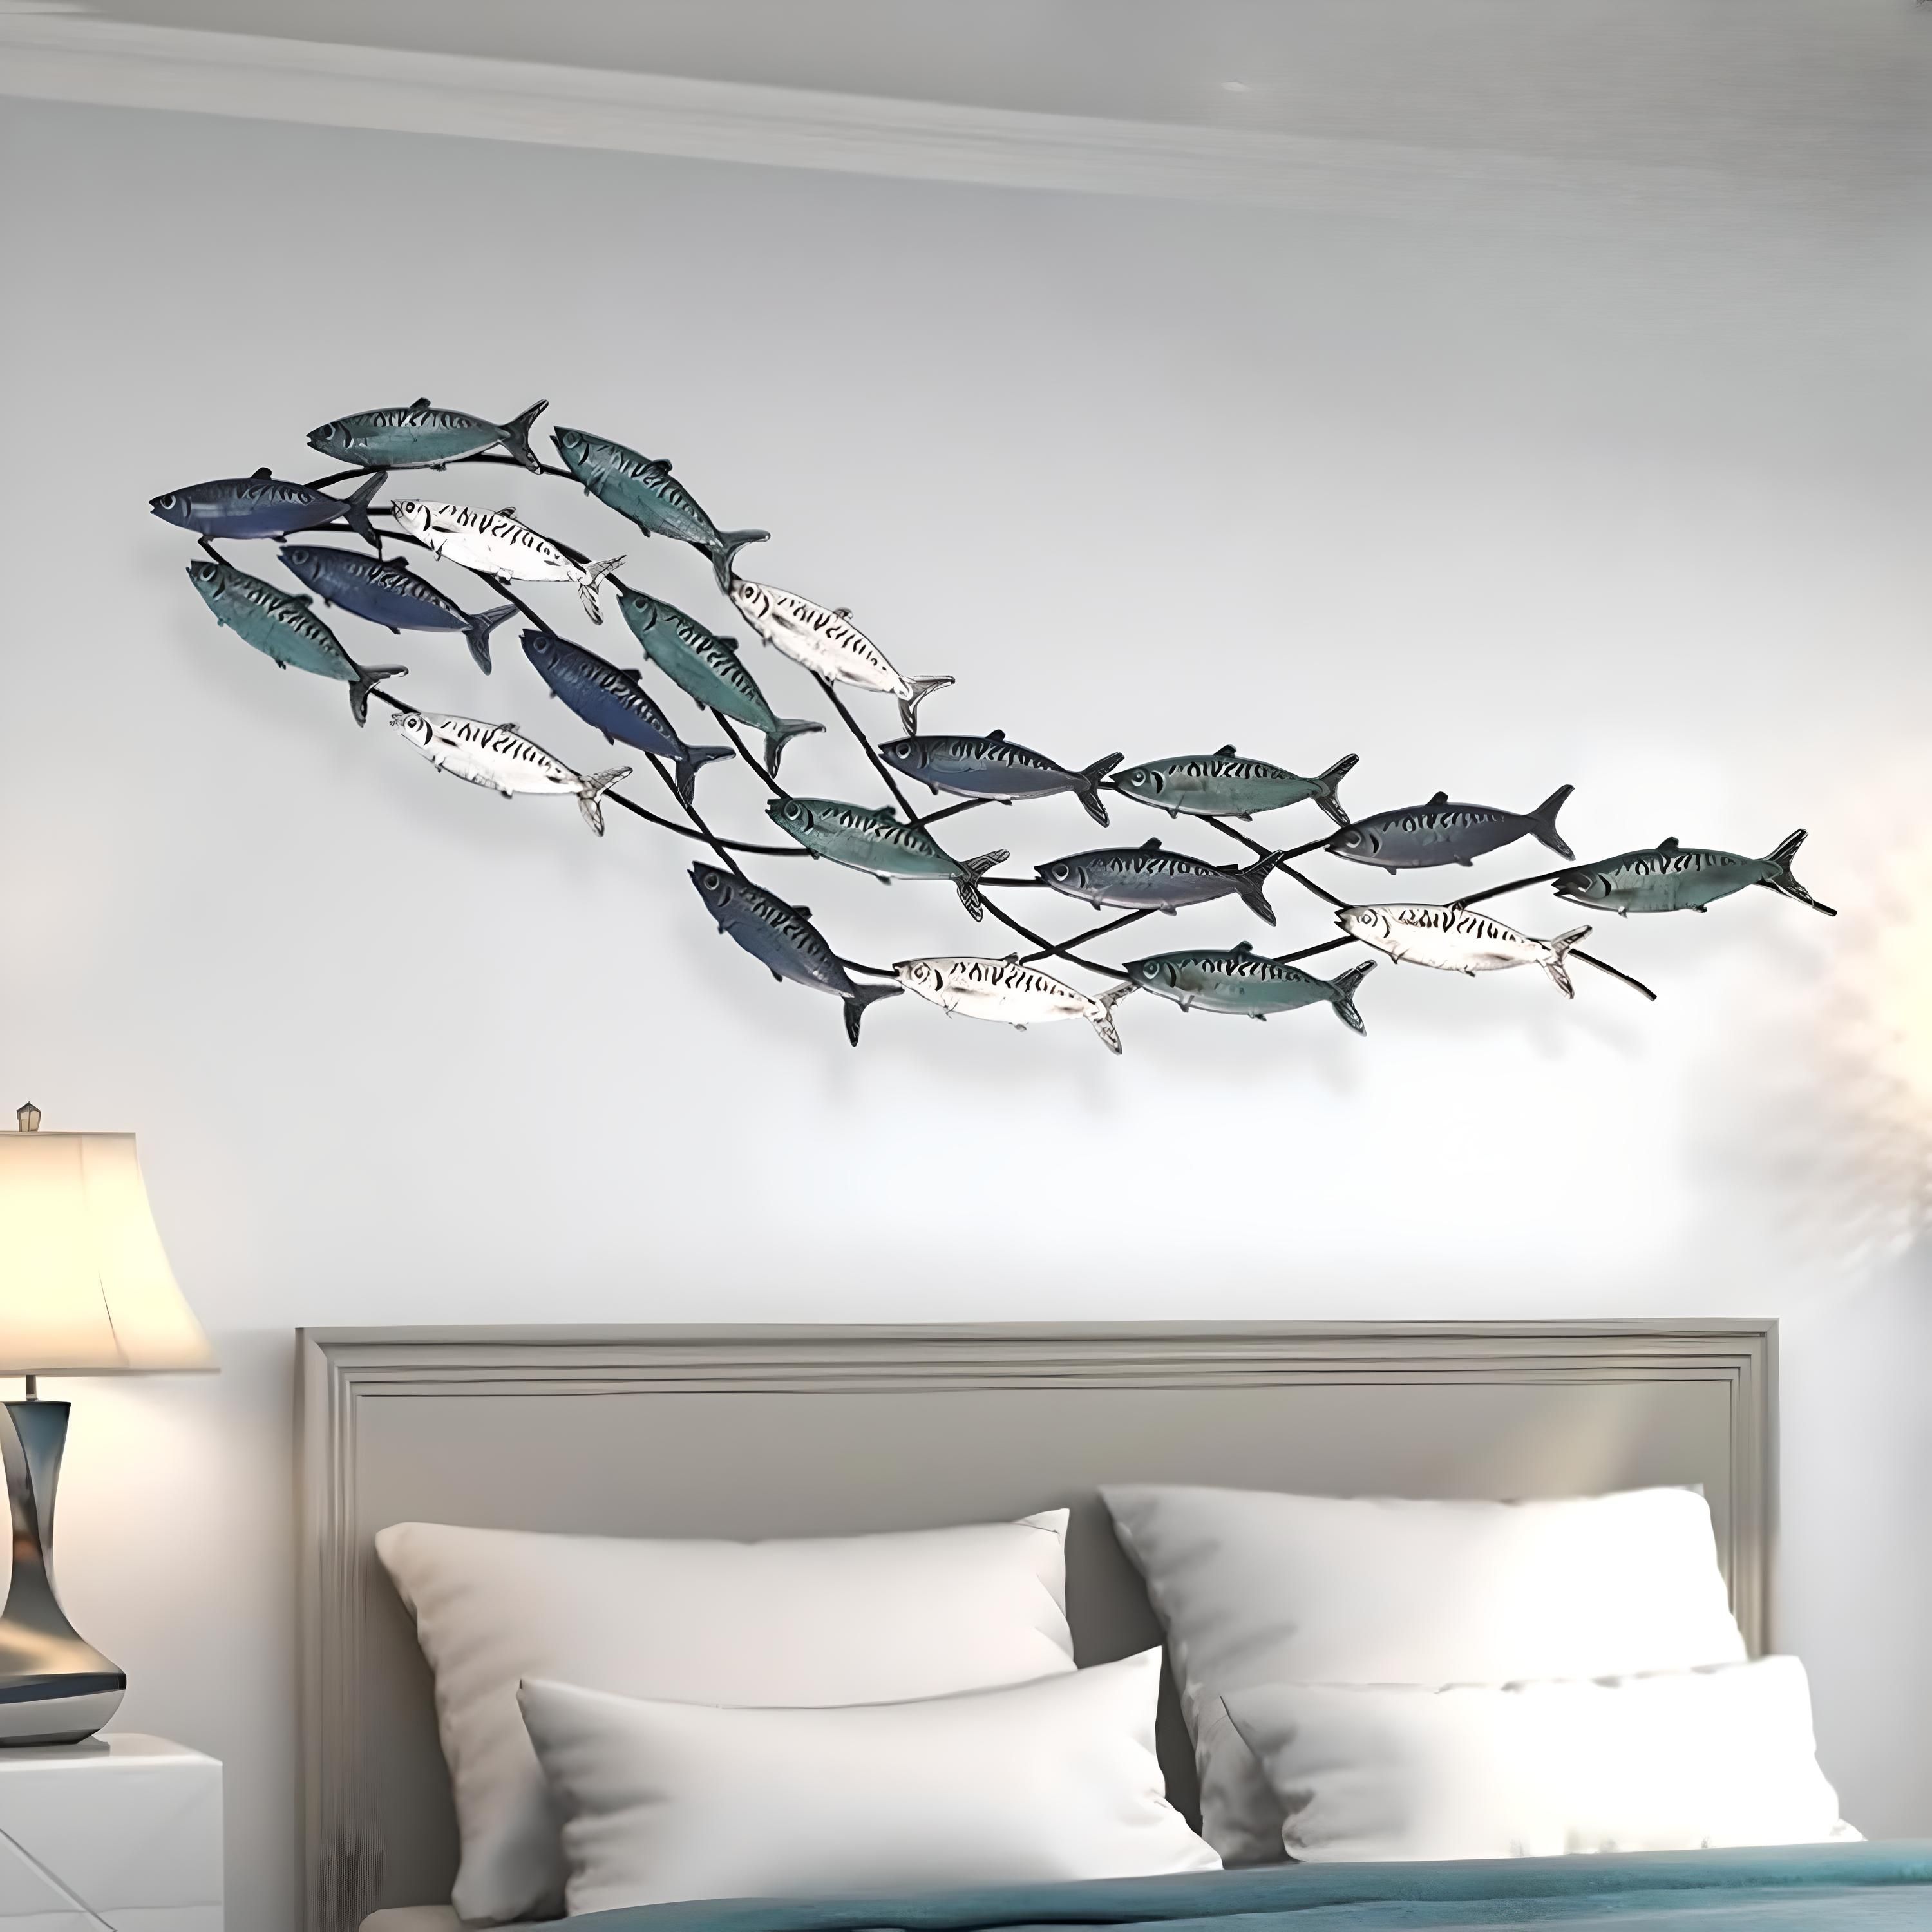 3D Metal Cluster of Fish Wall Art: Handcrafted Ocean Sculpture for Living Room, Pool, Bathroom, and Seaview Rooms